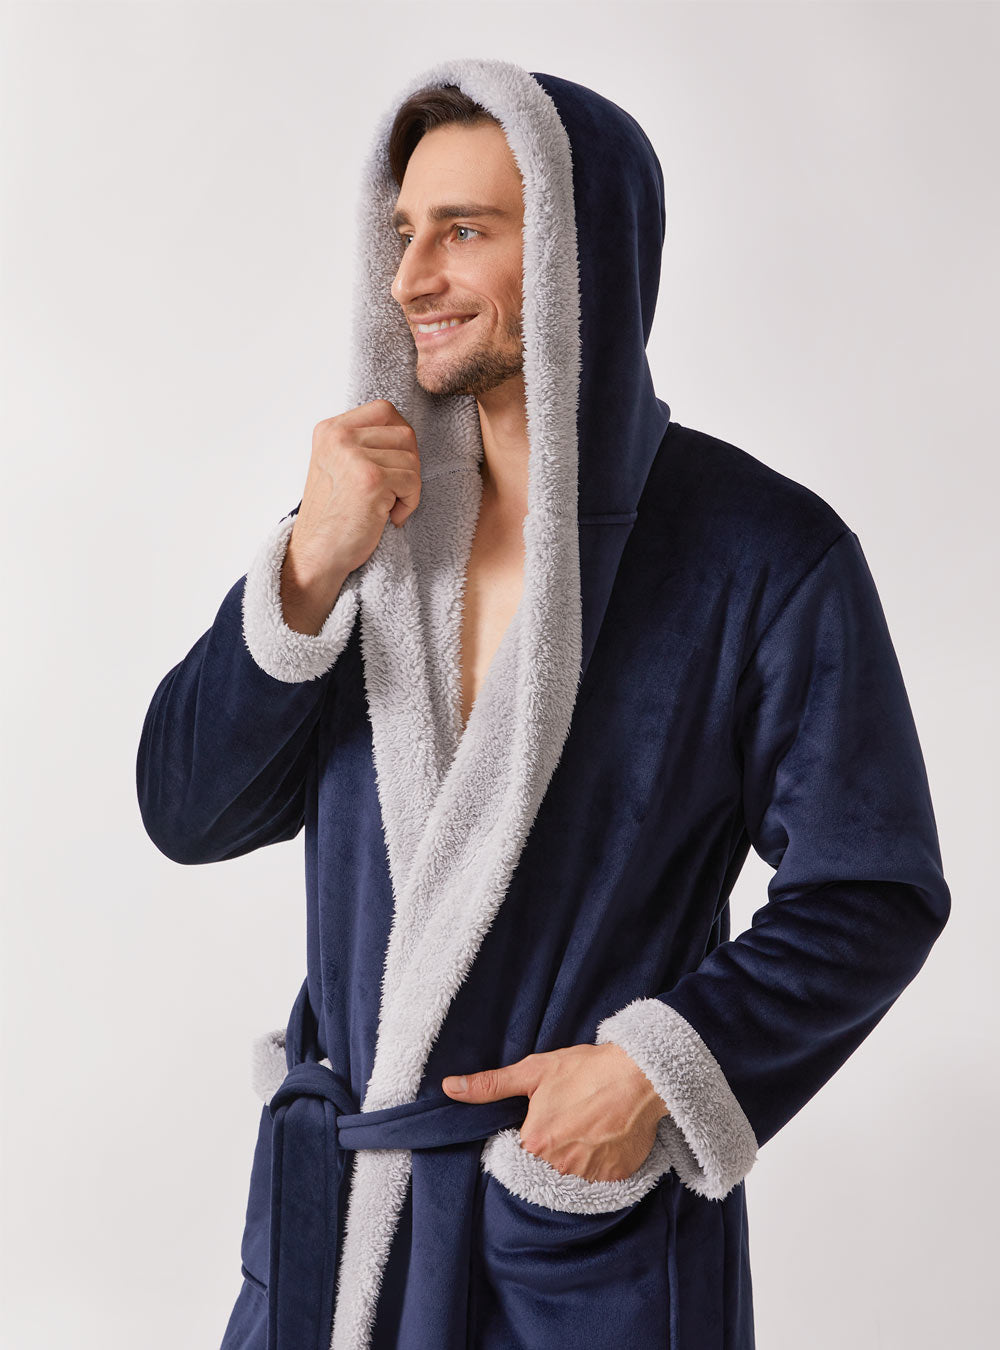 David Archy Hooded Robe Coral Fleece Soft Dressing Gown Mens